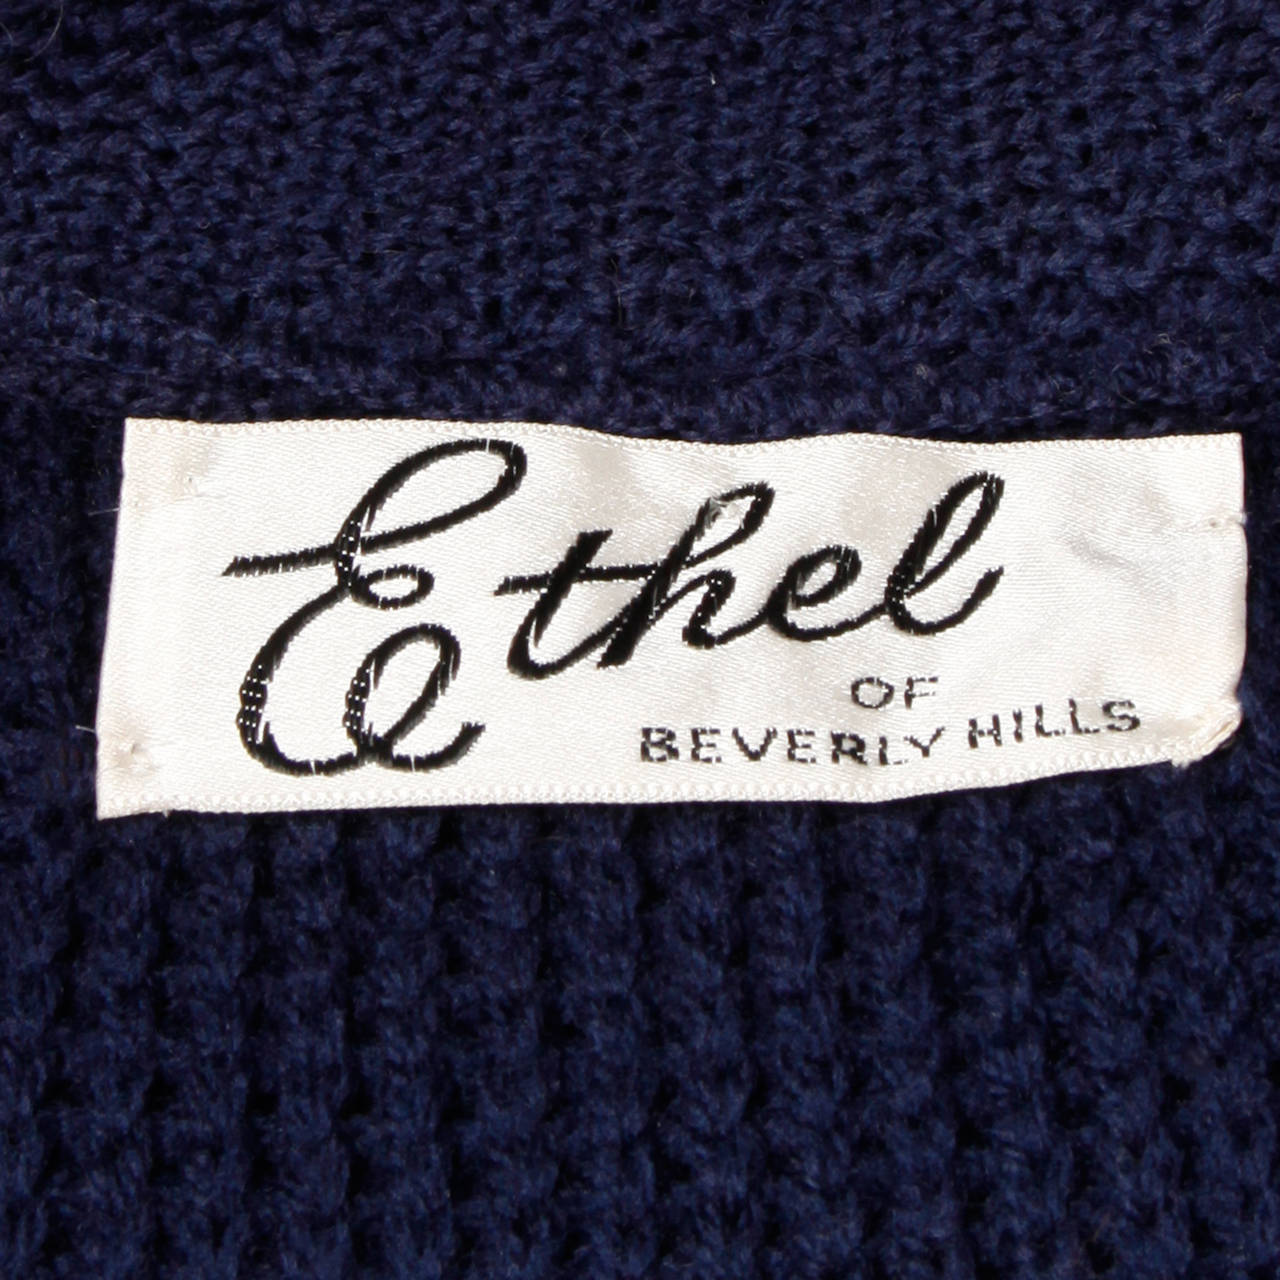 Ethel Beverly Hills 1960s Vintage Wool Cardigan Sweater with Mod Buckles 2